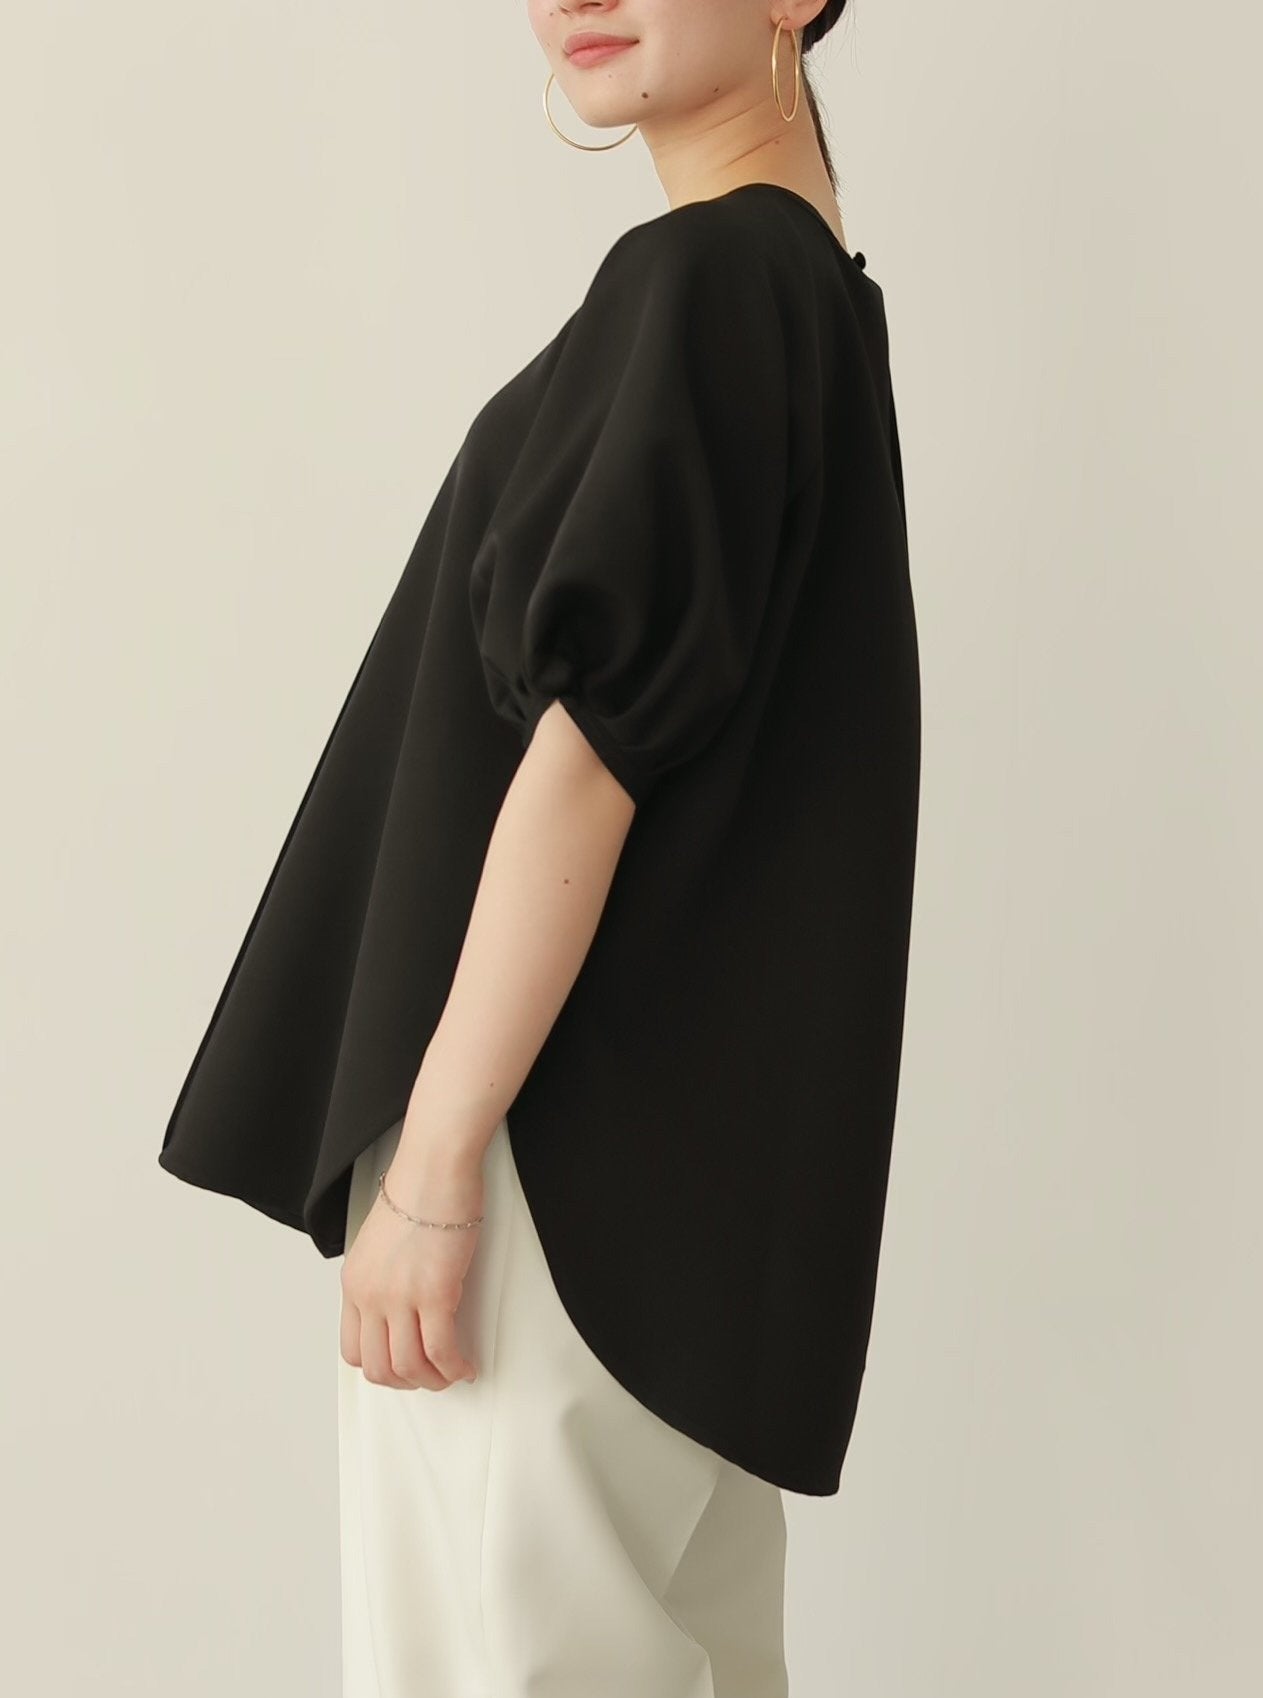 2021 SUMMER COLLECTION vol.1】DRAPE CAPE BLOUSE / PUFF SLEEVE OVER ...